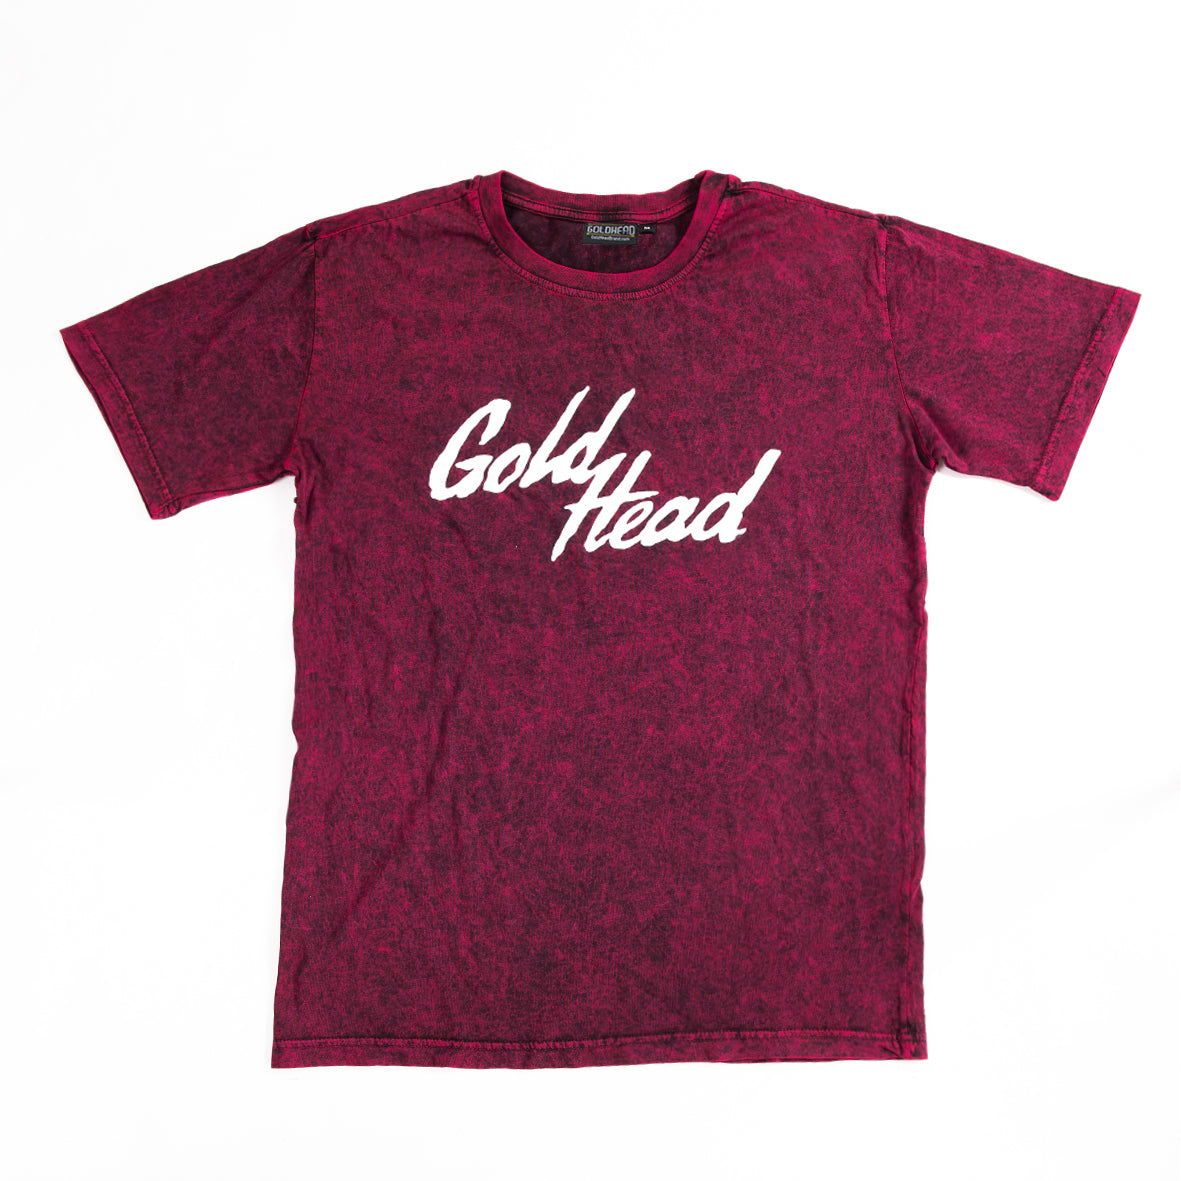 Staggered Logo Berry Acid Washed T-shirt